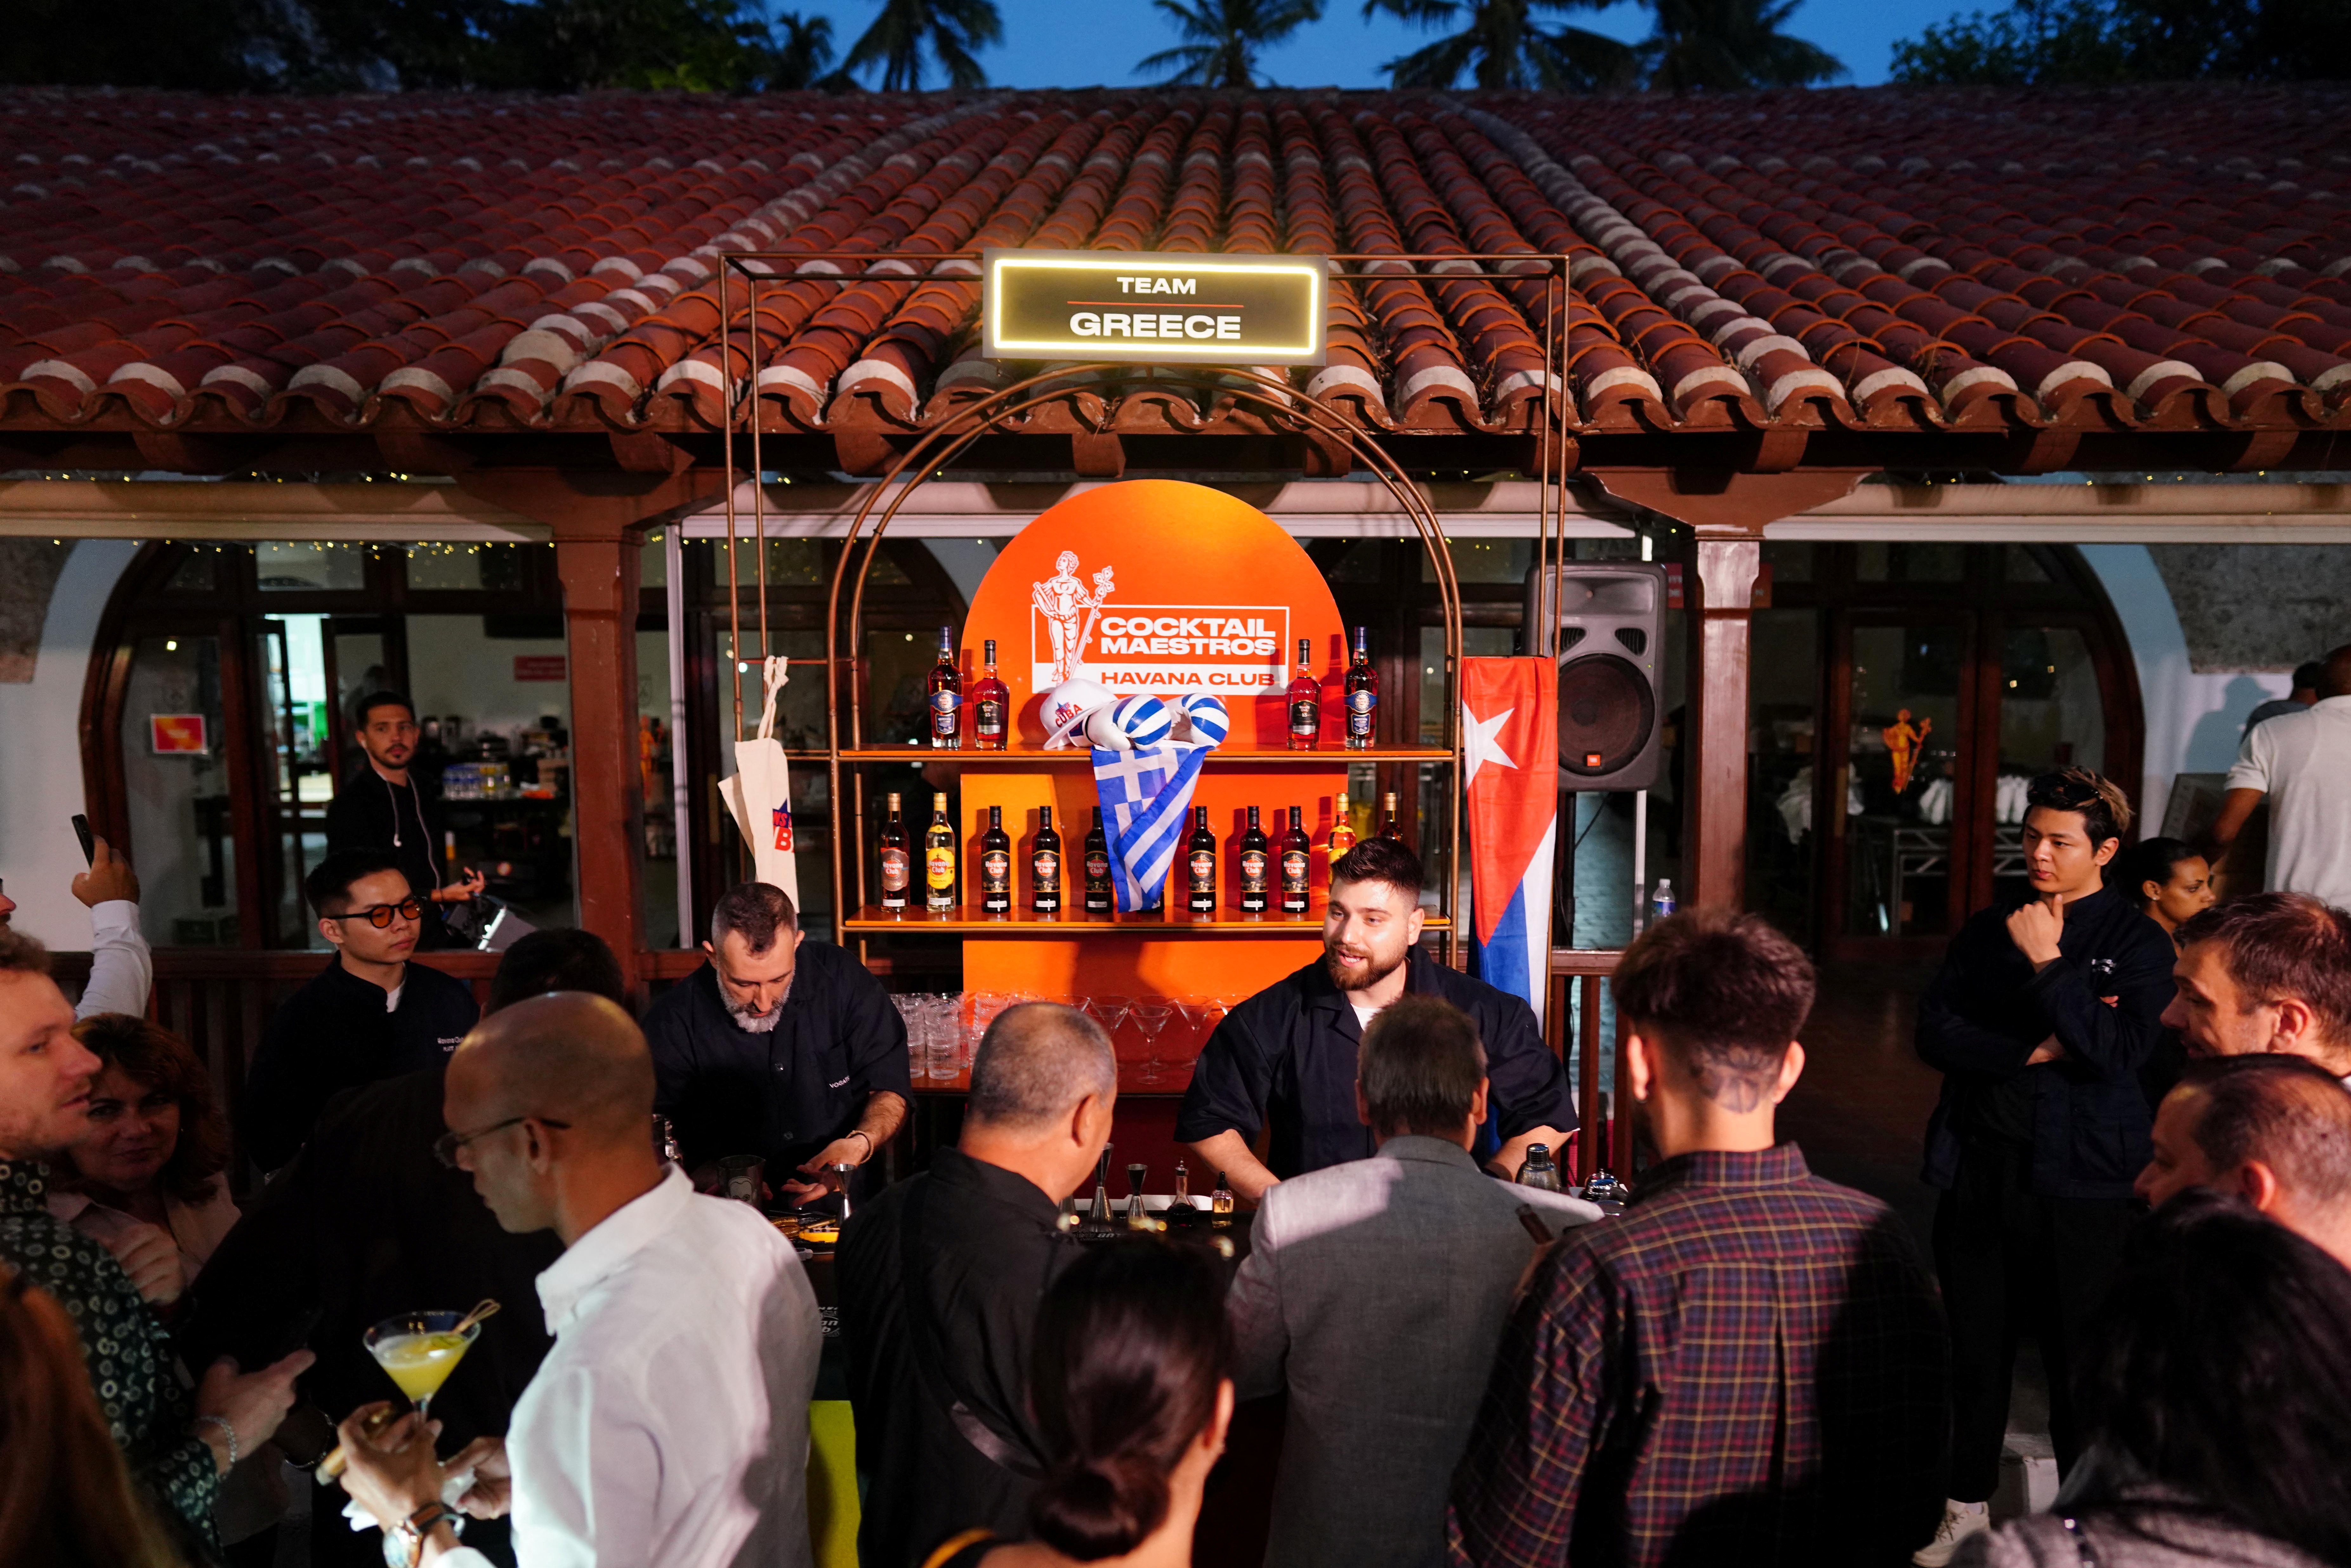 Bartenders from around the world compete in a tournament in Havana